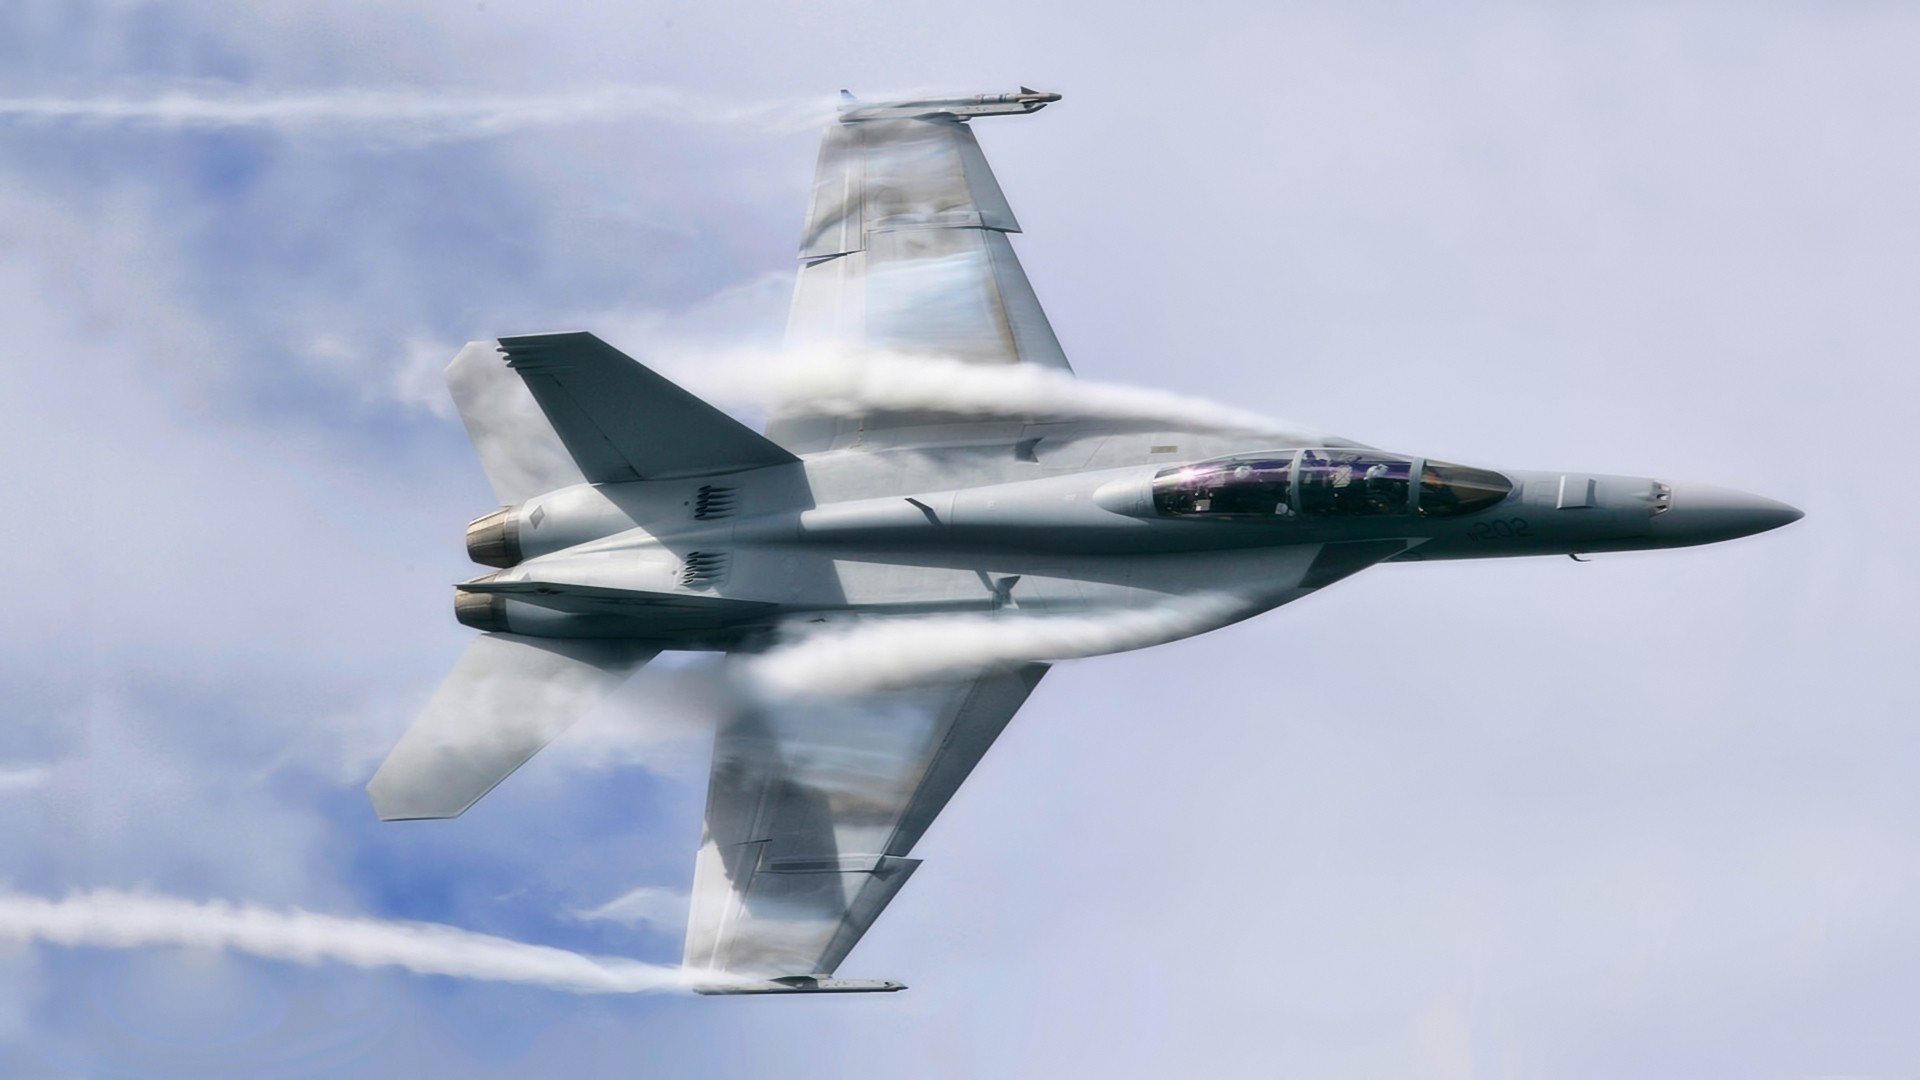 Free Download Aircraft Military Vehicles F 18 Hornet Fighter Jets Desktop 19x1080 For Your Desktop Mobile Tablet Explore 45 F 18 Wallpapers 19x1080 F18 Wallpaper F 18 Super Hornet Wallpaper F 18 Pictures And Wallpapers